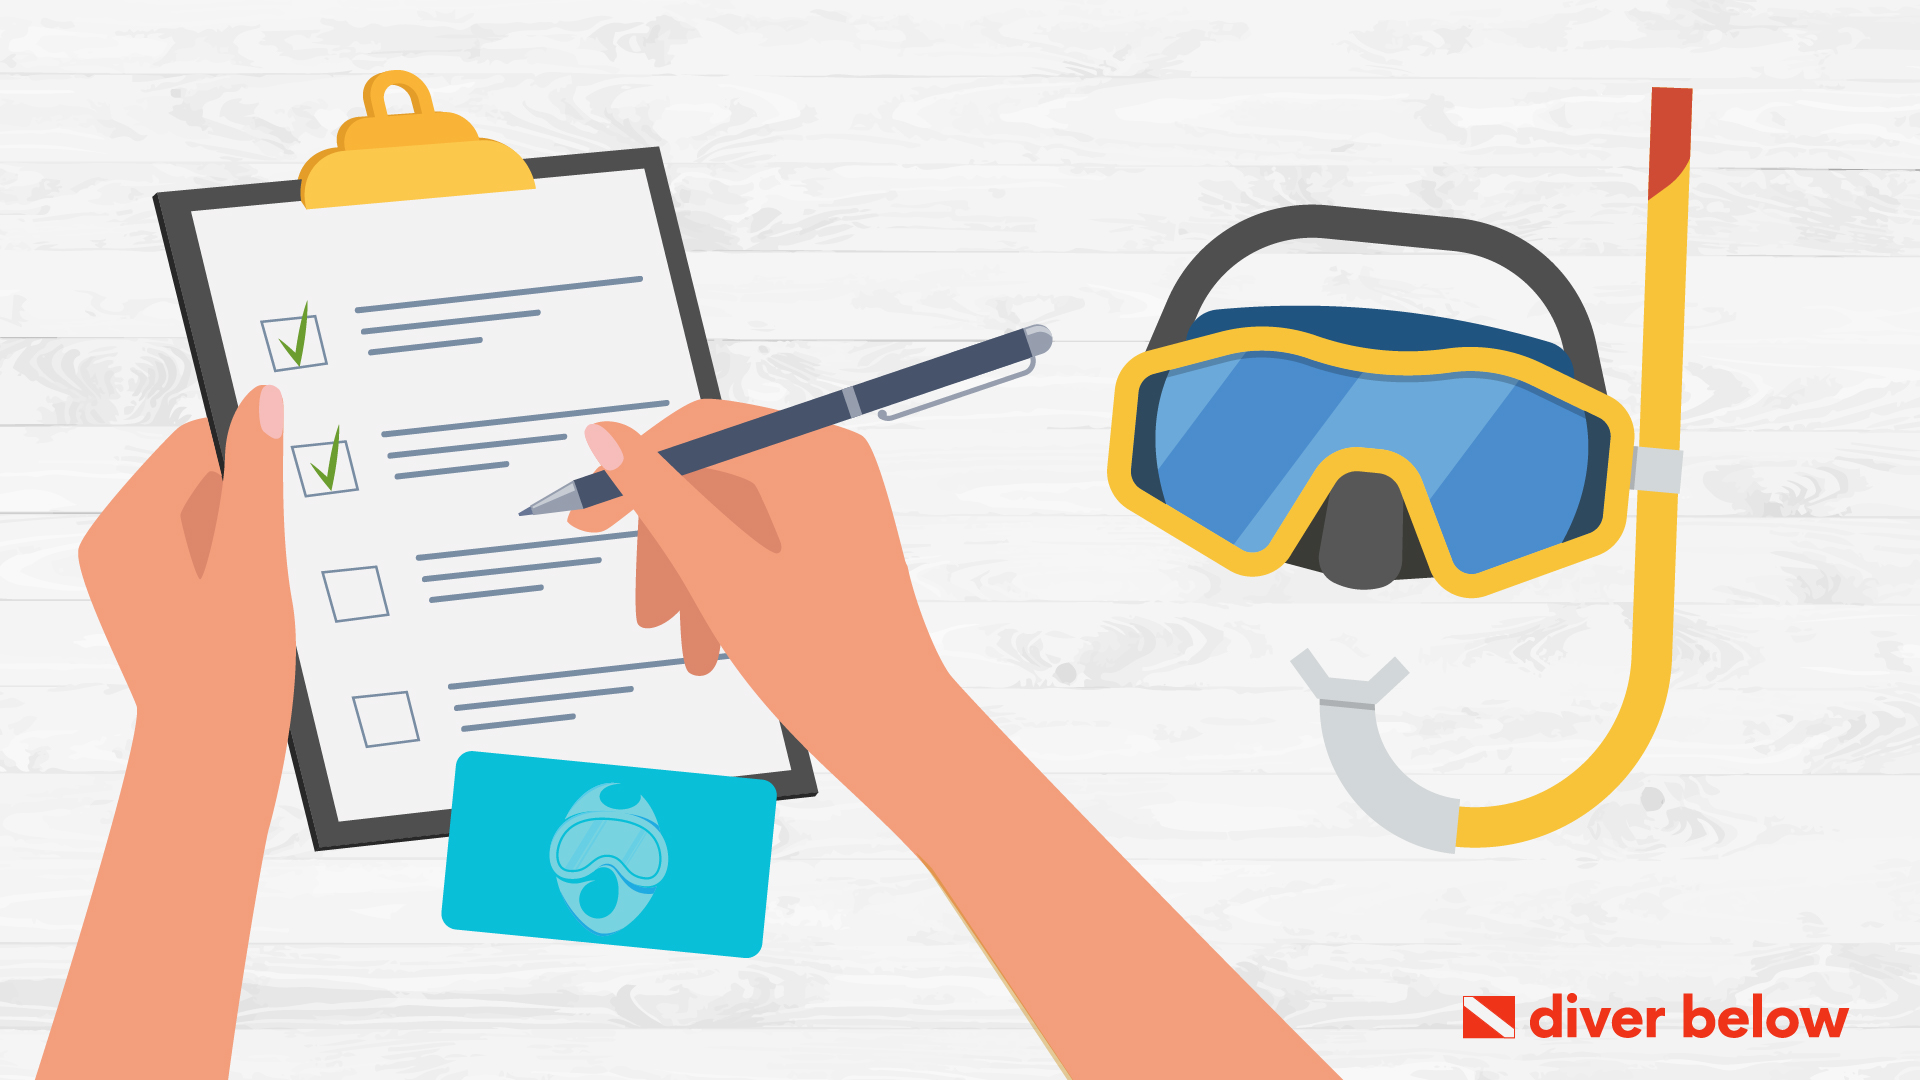 vector graphic showing a scuba mask next to a clipboard used to illustrate dive logging